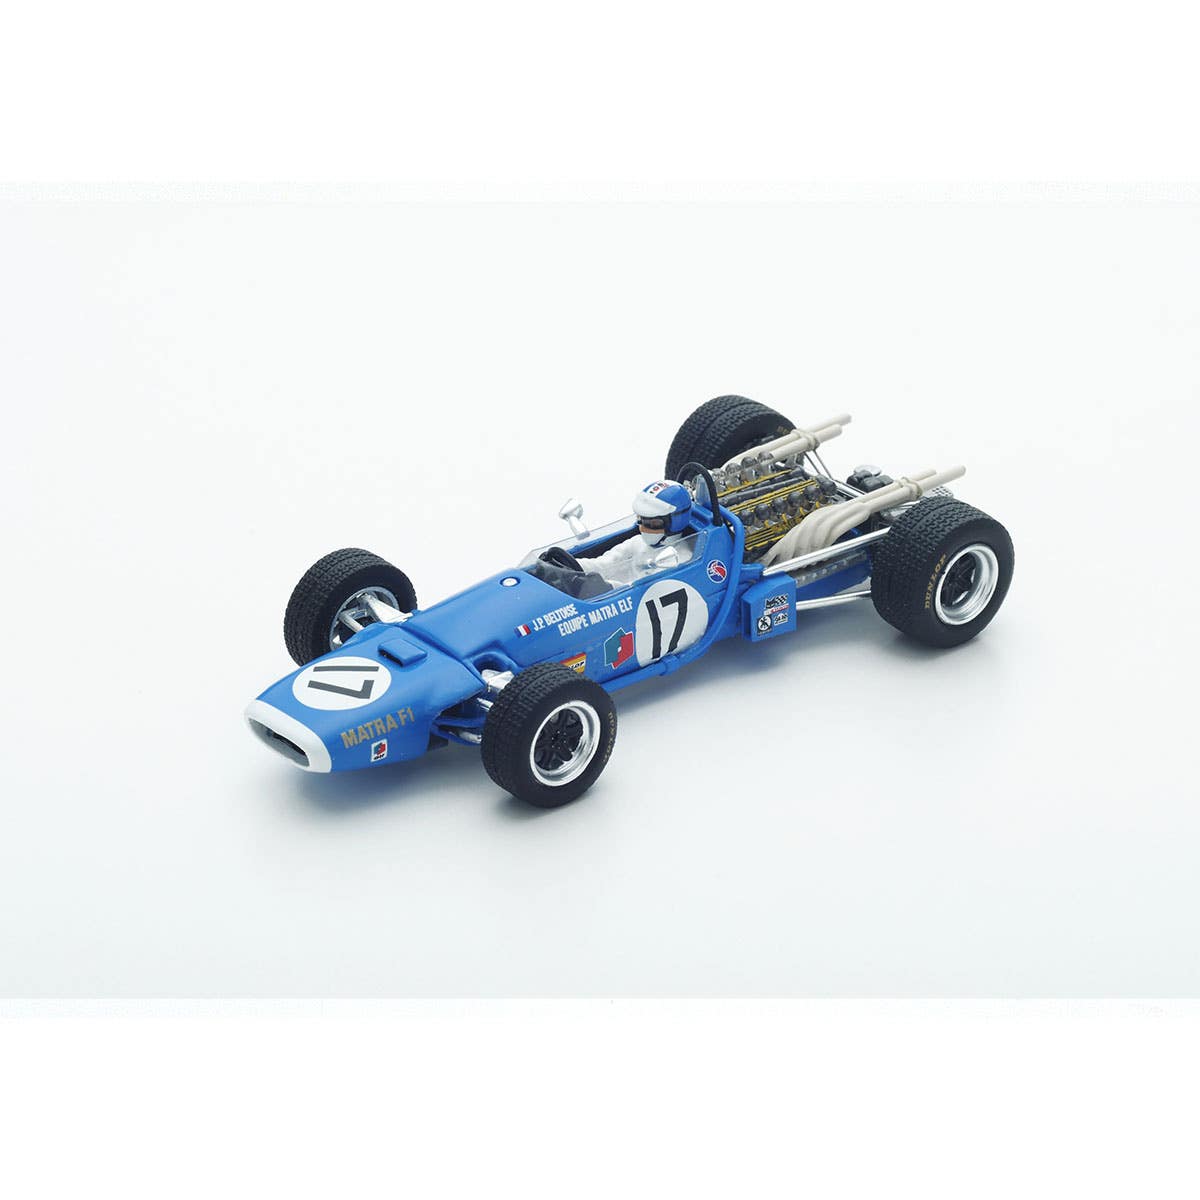 Matra MS11 No.17 2nd Dutch GP 1968 - Jean-Pierre Beltoise - With Acrylic Cover - 1:18 Scale Resin Model Car